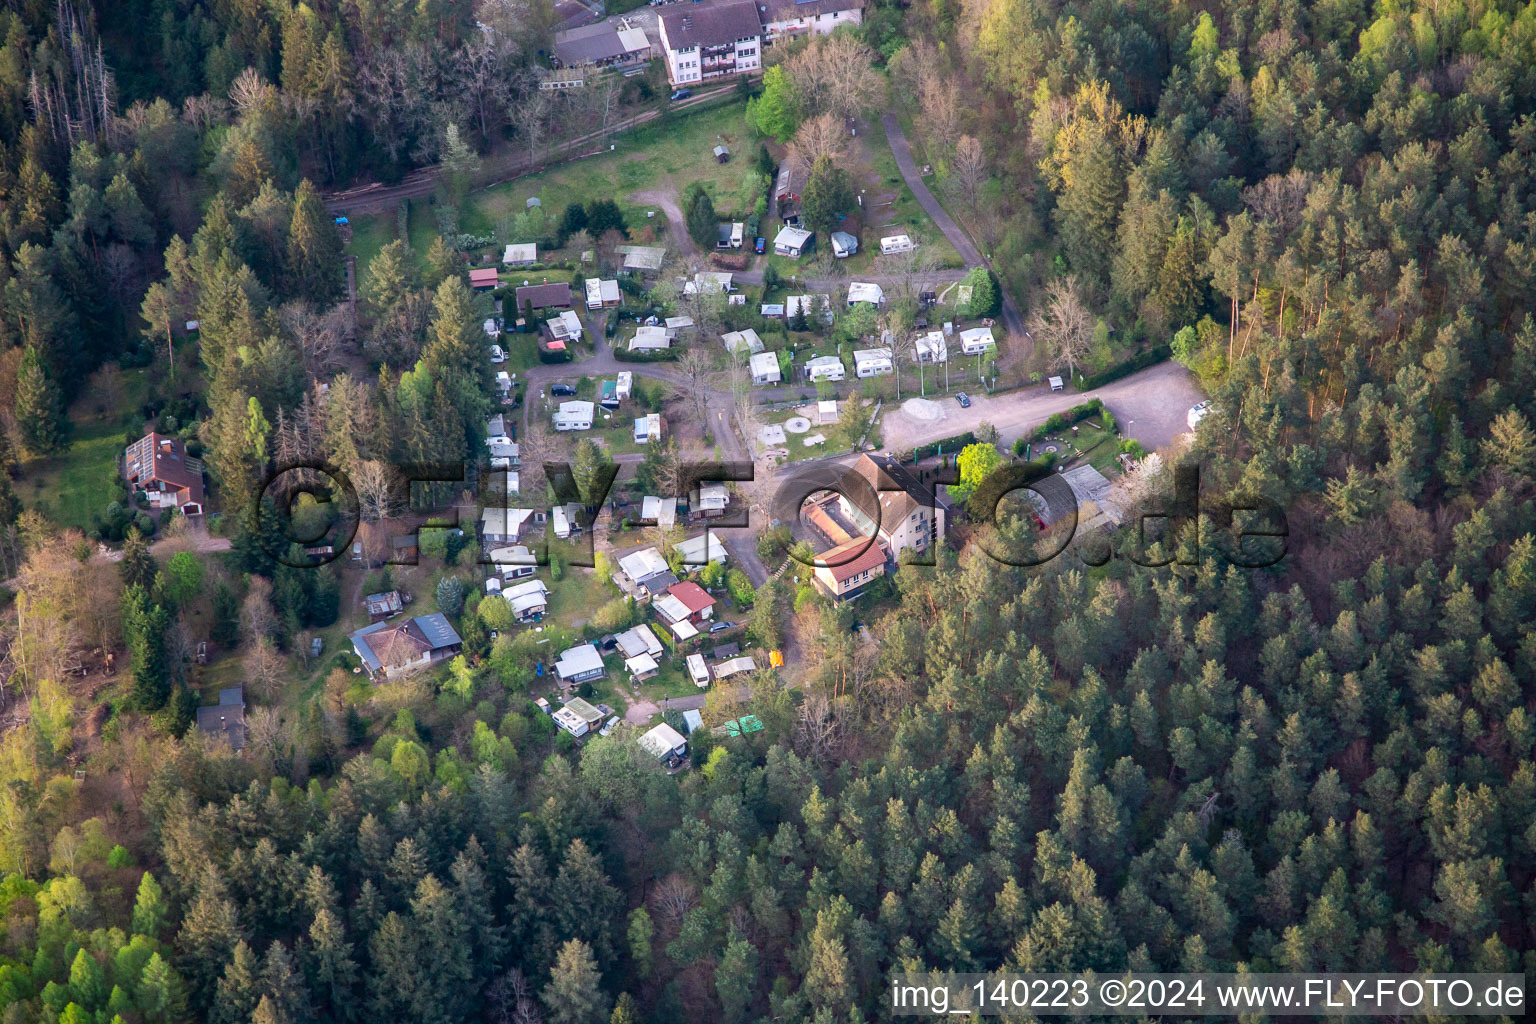 Aerial view of Camping and Naturfreundehaus Bethof in Vorderweidenthal in the state Rhineland-Palatinate, Germany